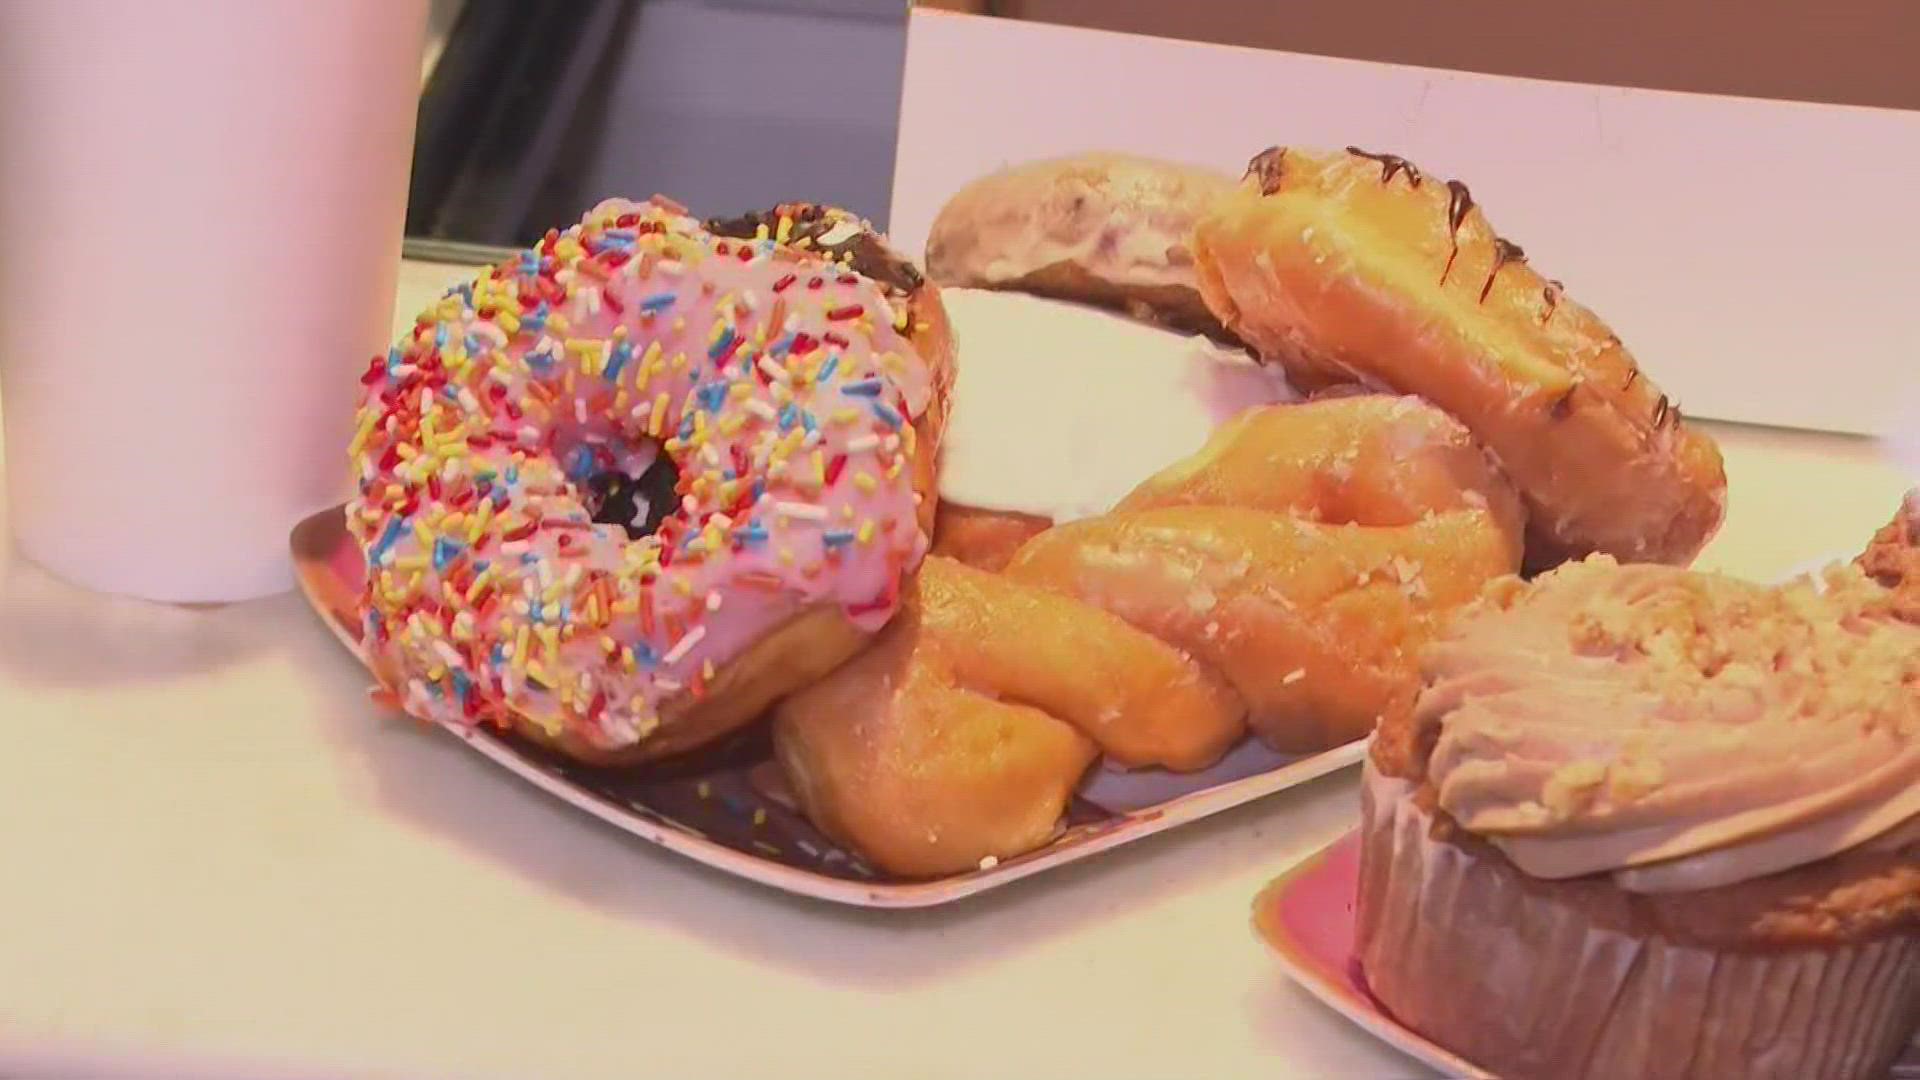 Honey Creme Donut Shop has been serving New Albany for decades and will now serve the Metro through a walk-up window.